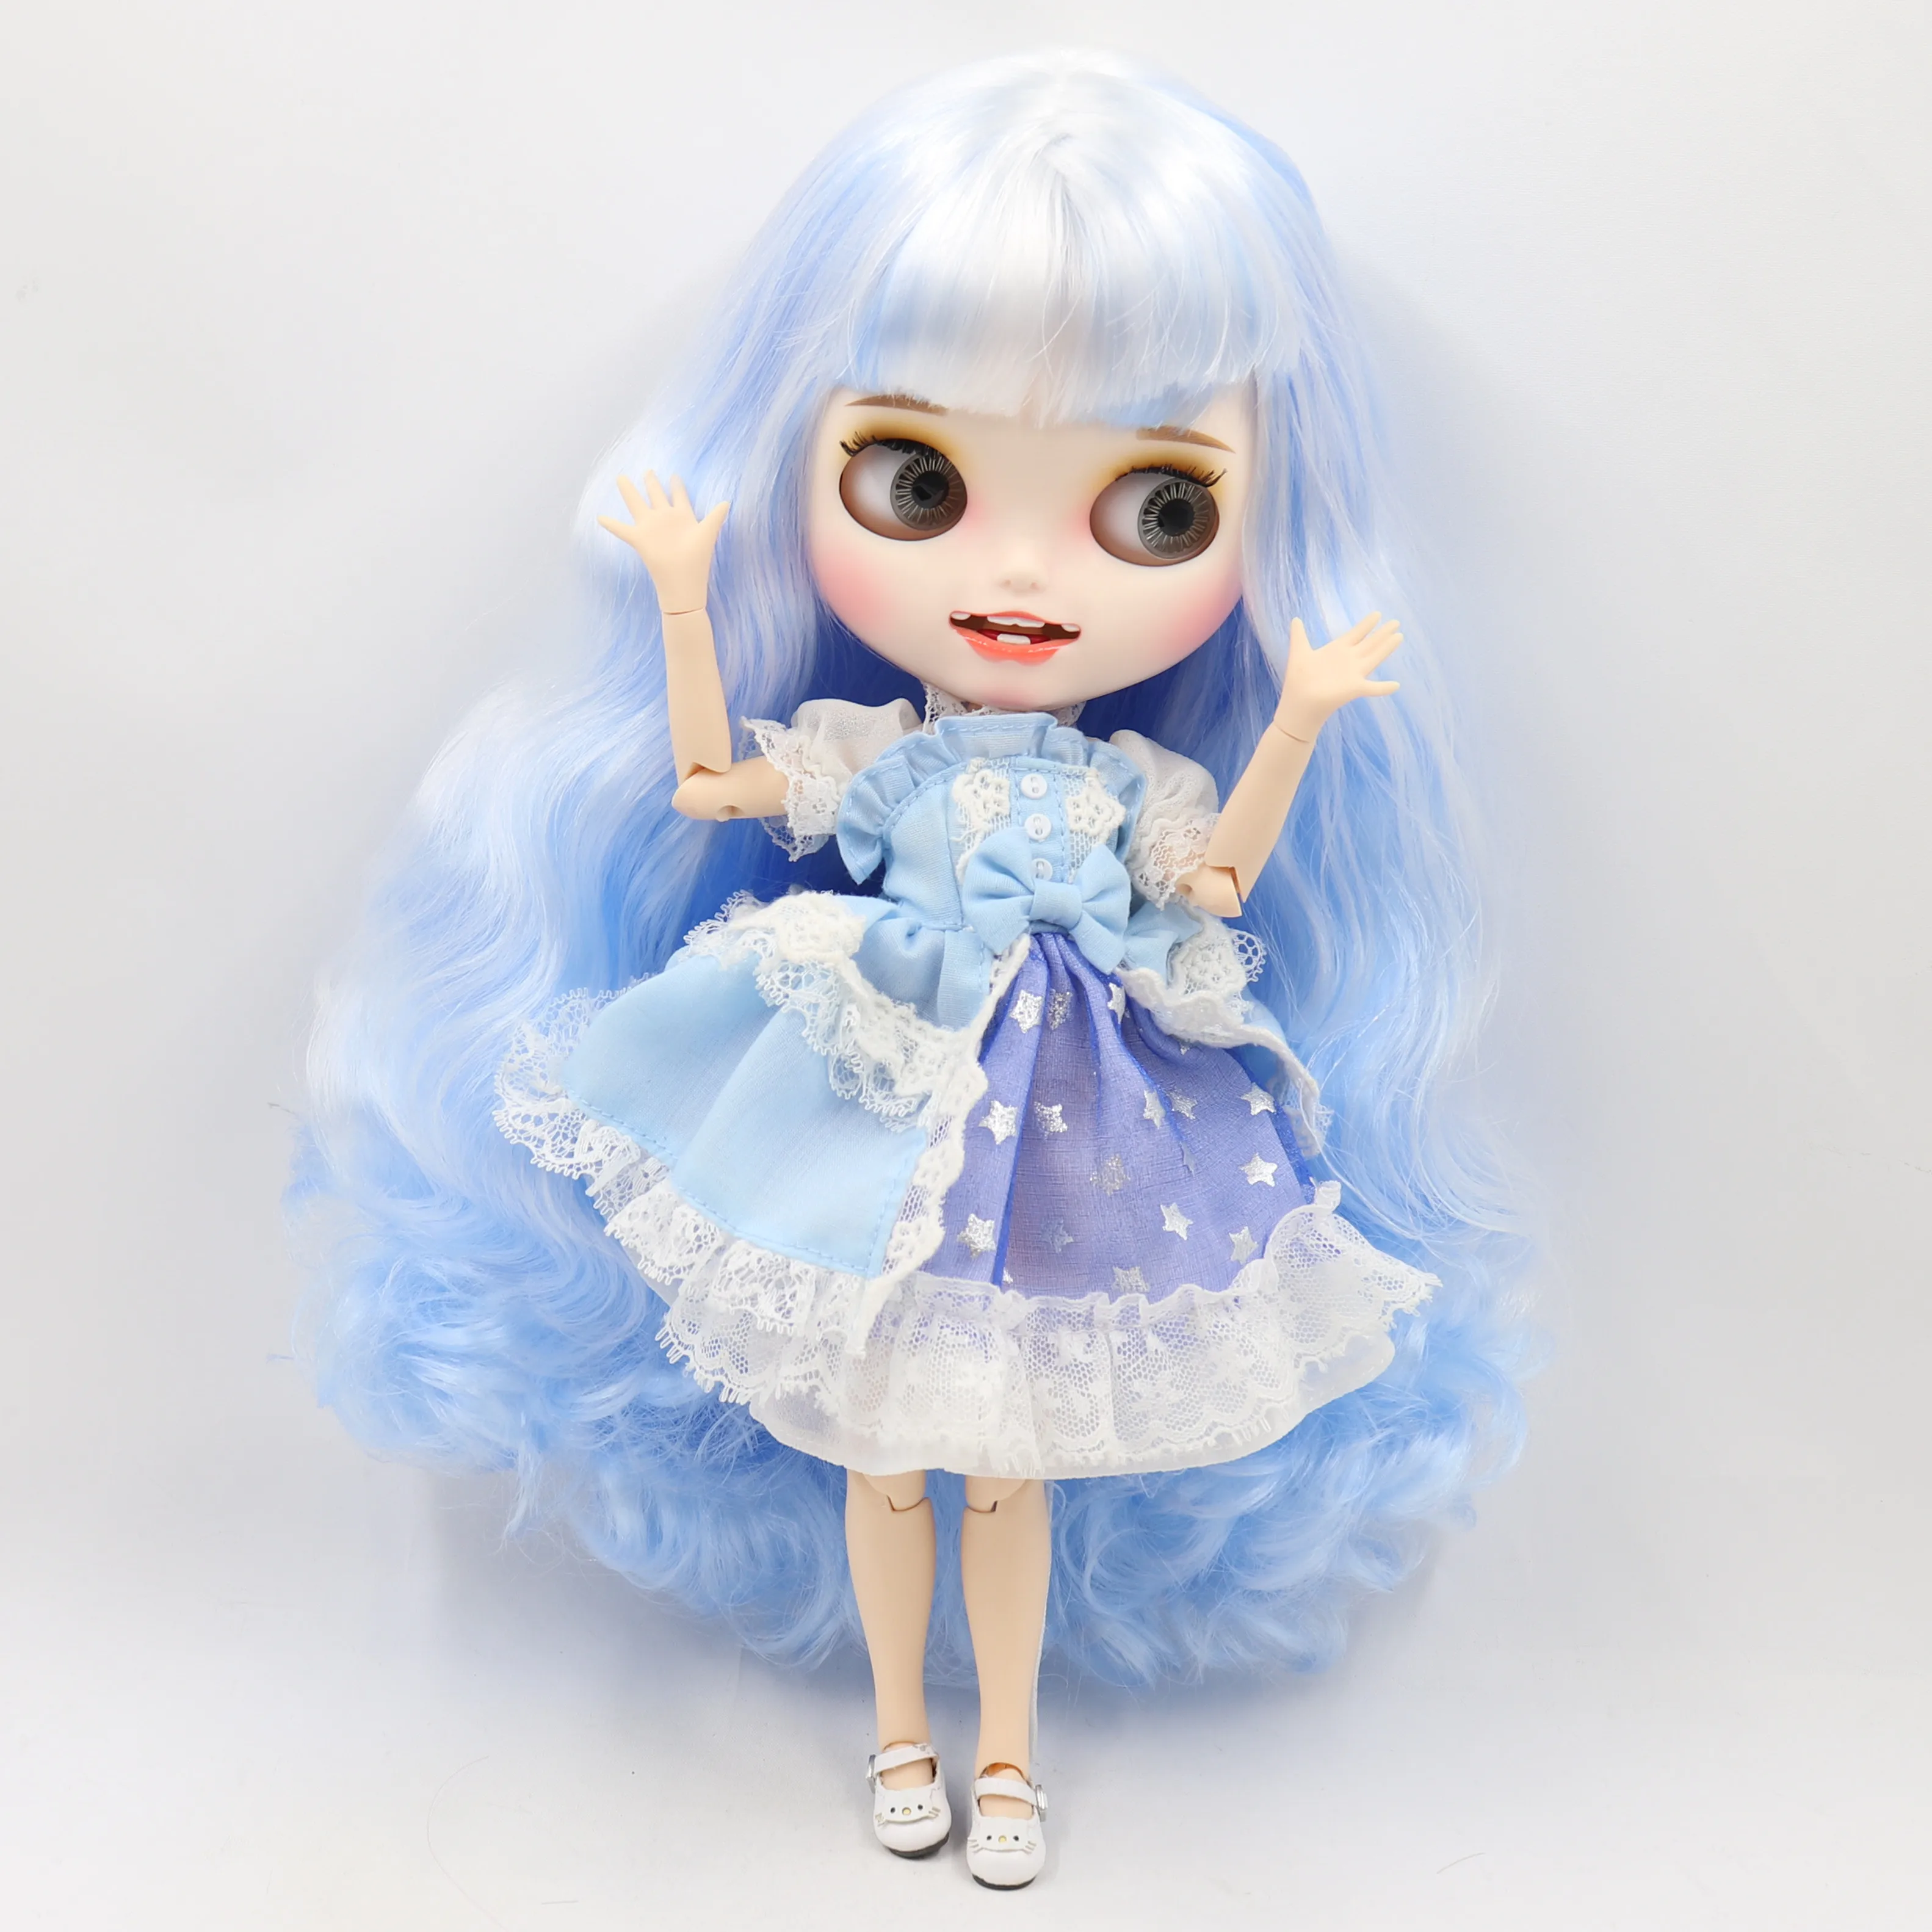 ICY DBS factory blyth doll CUSTMIZED carvd lips teeth matte face joint body